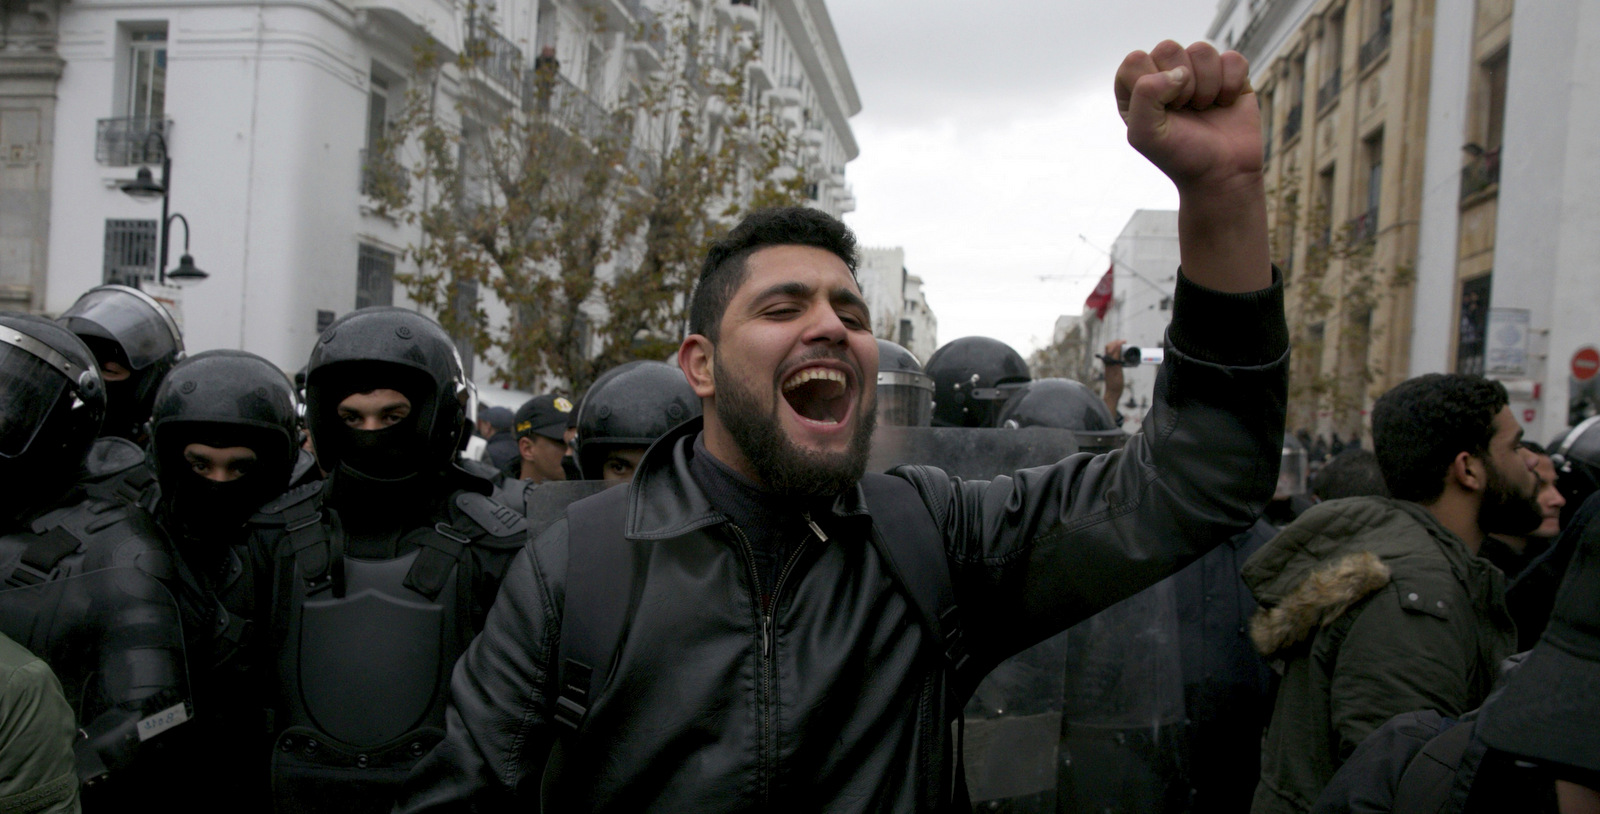 Protesters face riot police during a demonstration in Tunis, Tunisia, Jan. 12, 2018. Tunisia's government says protests over food prices led to days of clashes with police that left one dead, dozens injured and widespread damage. (AP/Hassene Dridi)